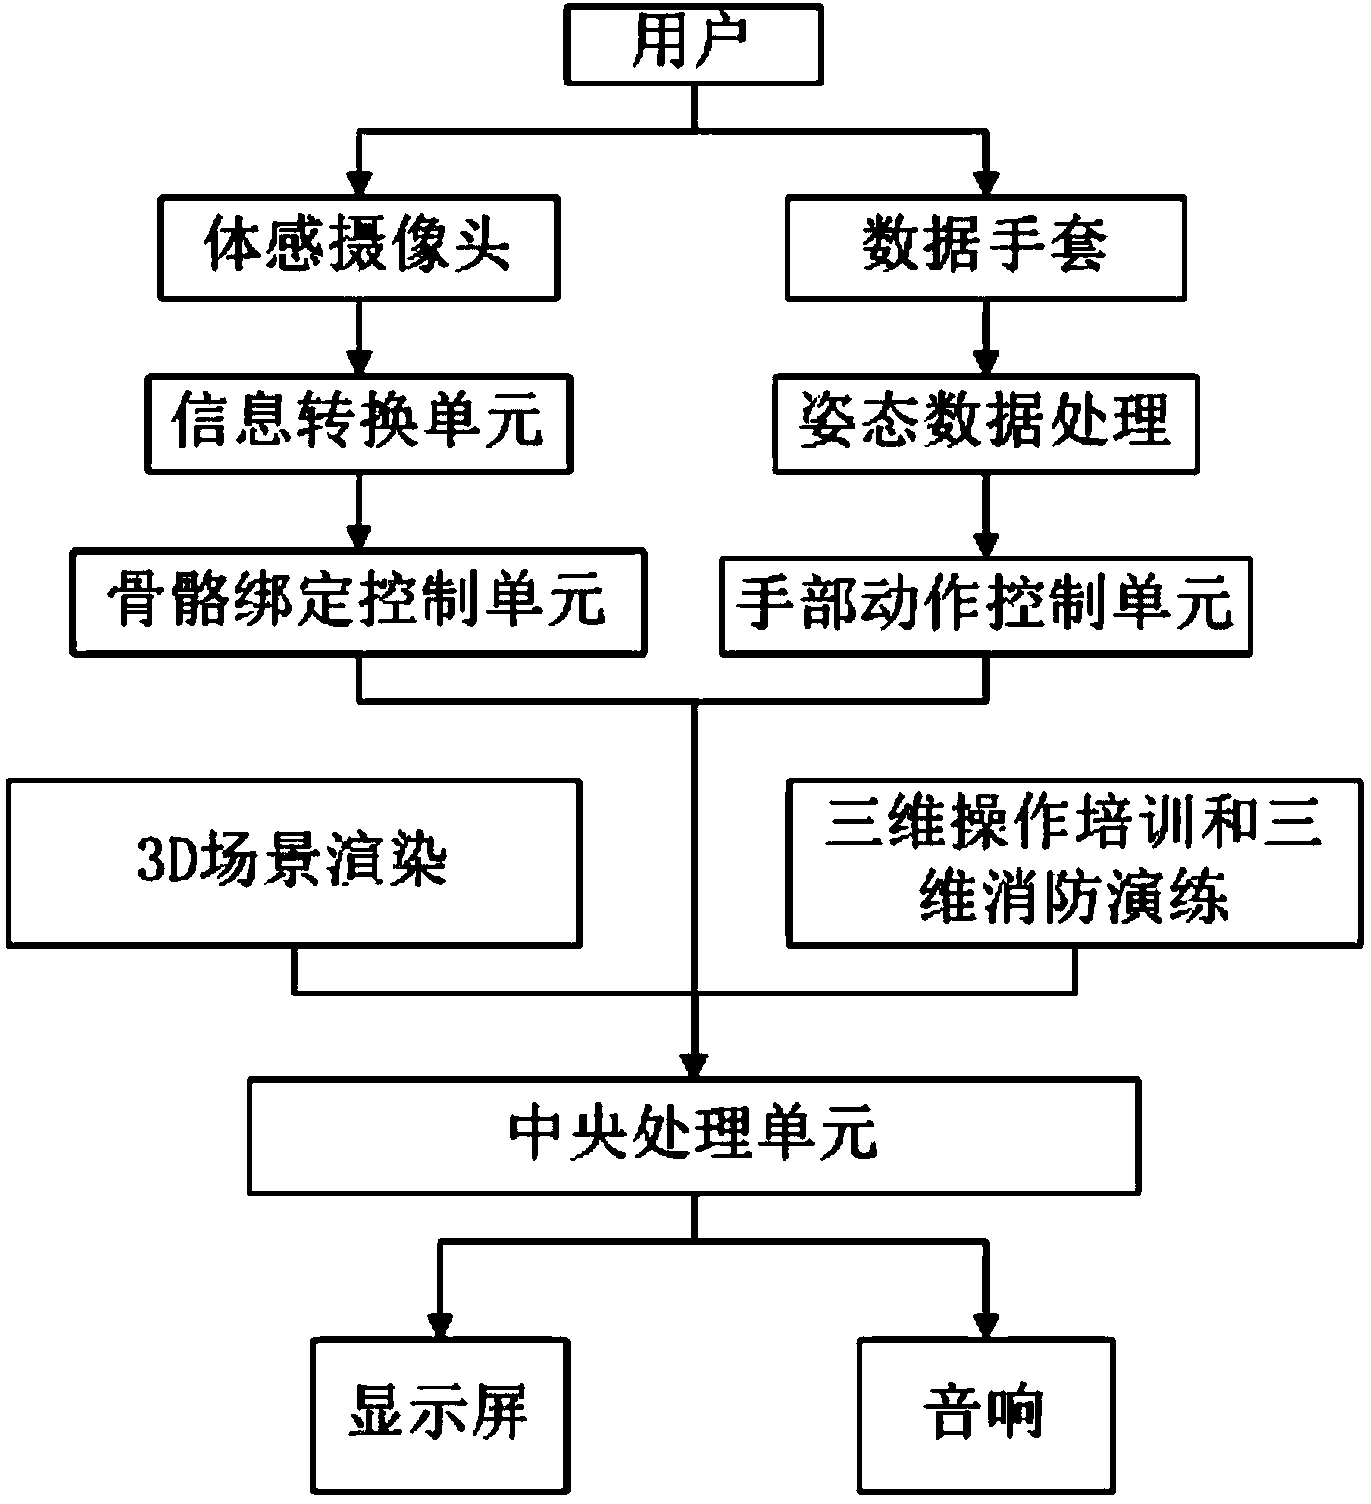 Multi-perception and interaction type oil depot safe operation training method